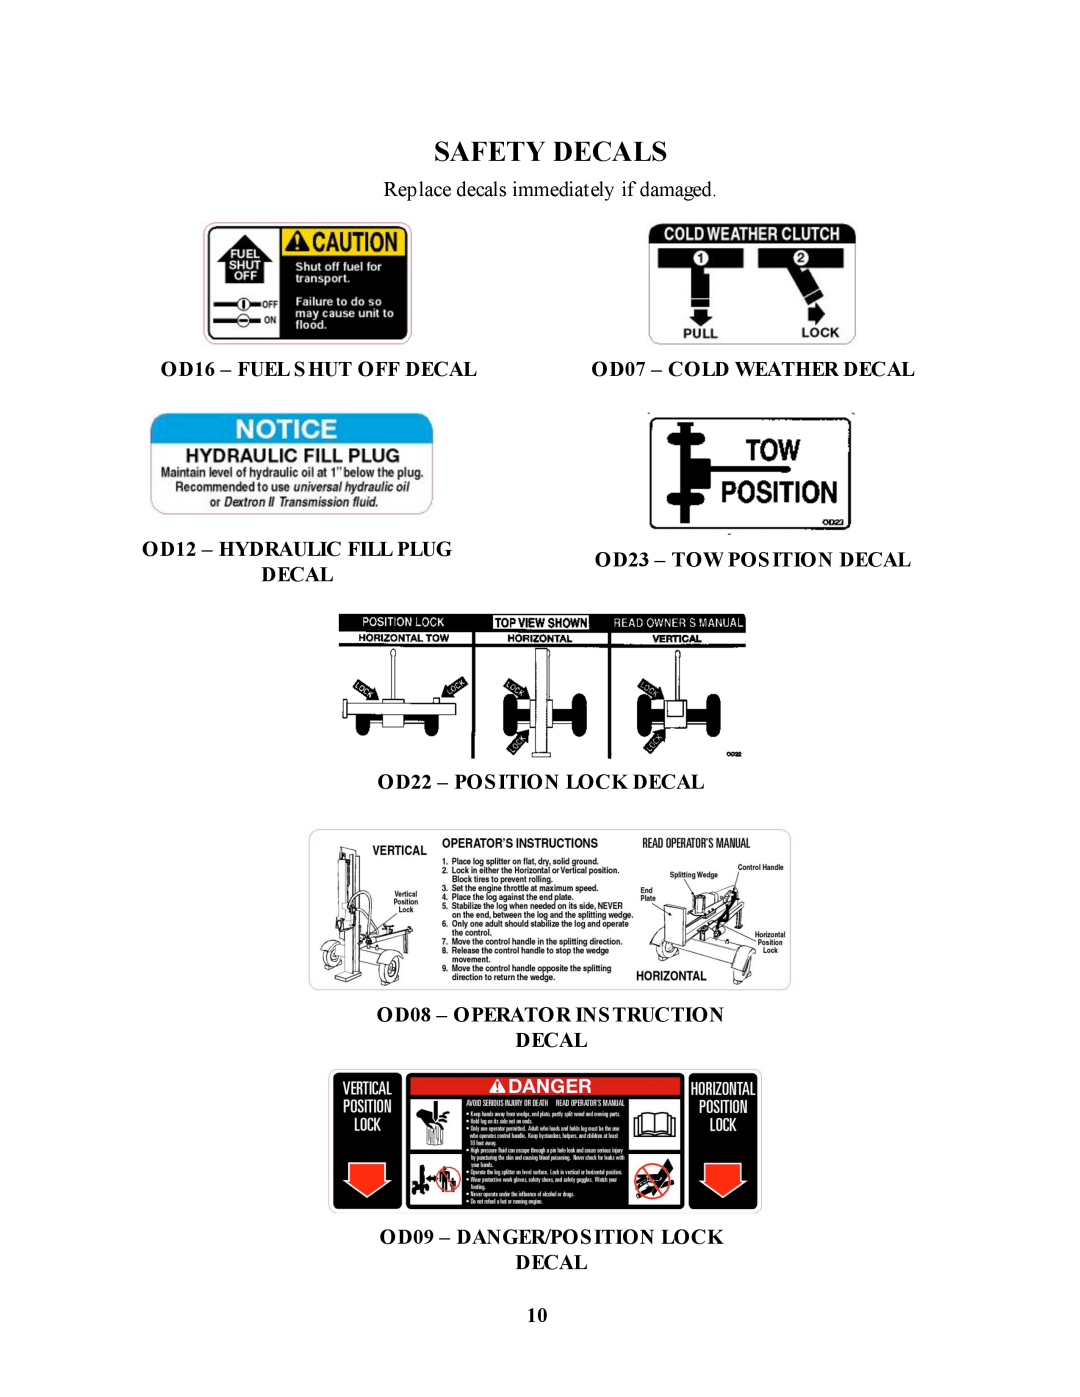 Swisher LS928 Safety Decals, Replace decals immediately if damaged, OD16 - FUEL SHUT OFF DECAL, OD07 - COLD WEATHER DECAL 